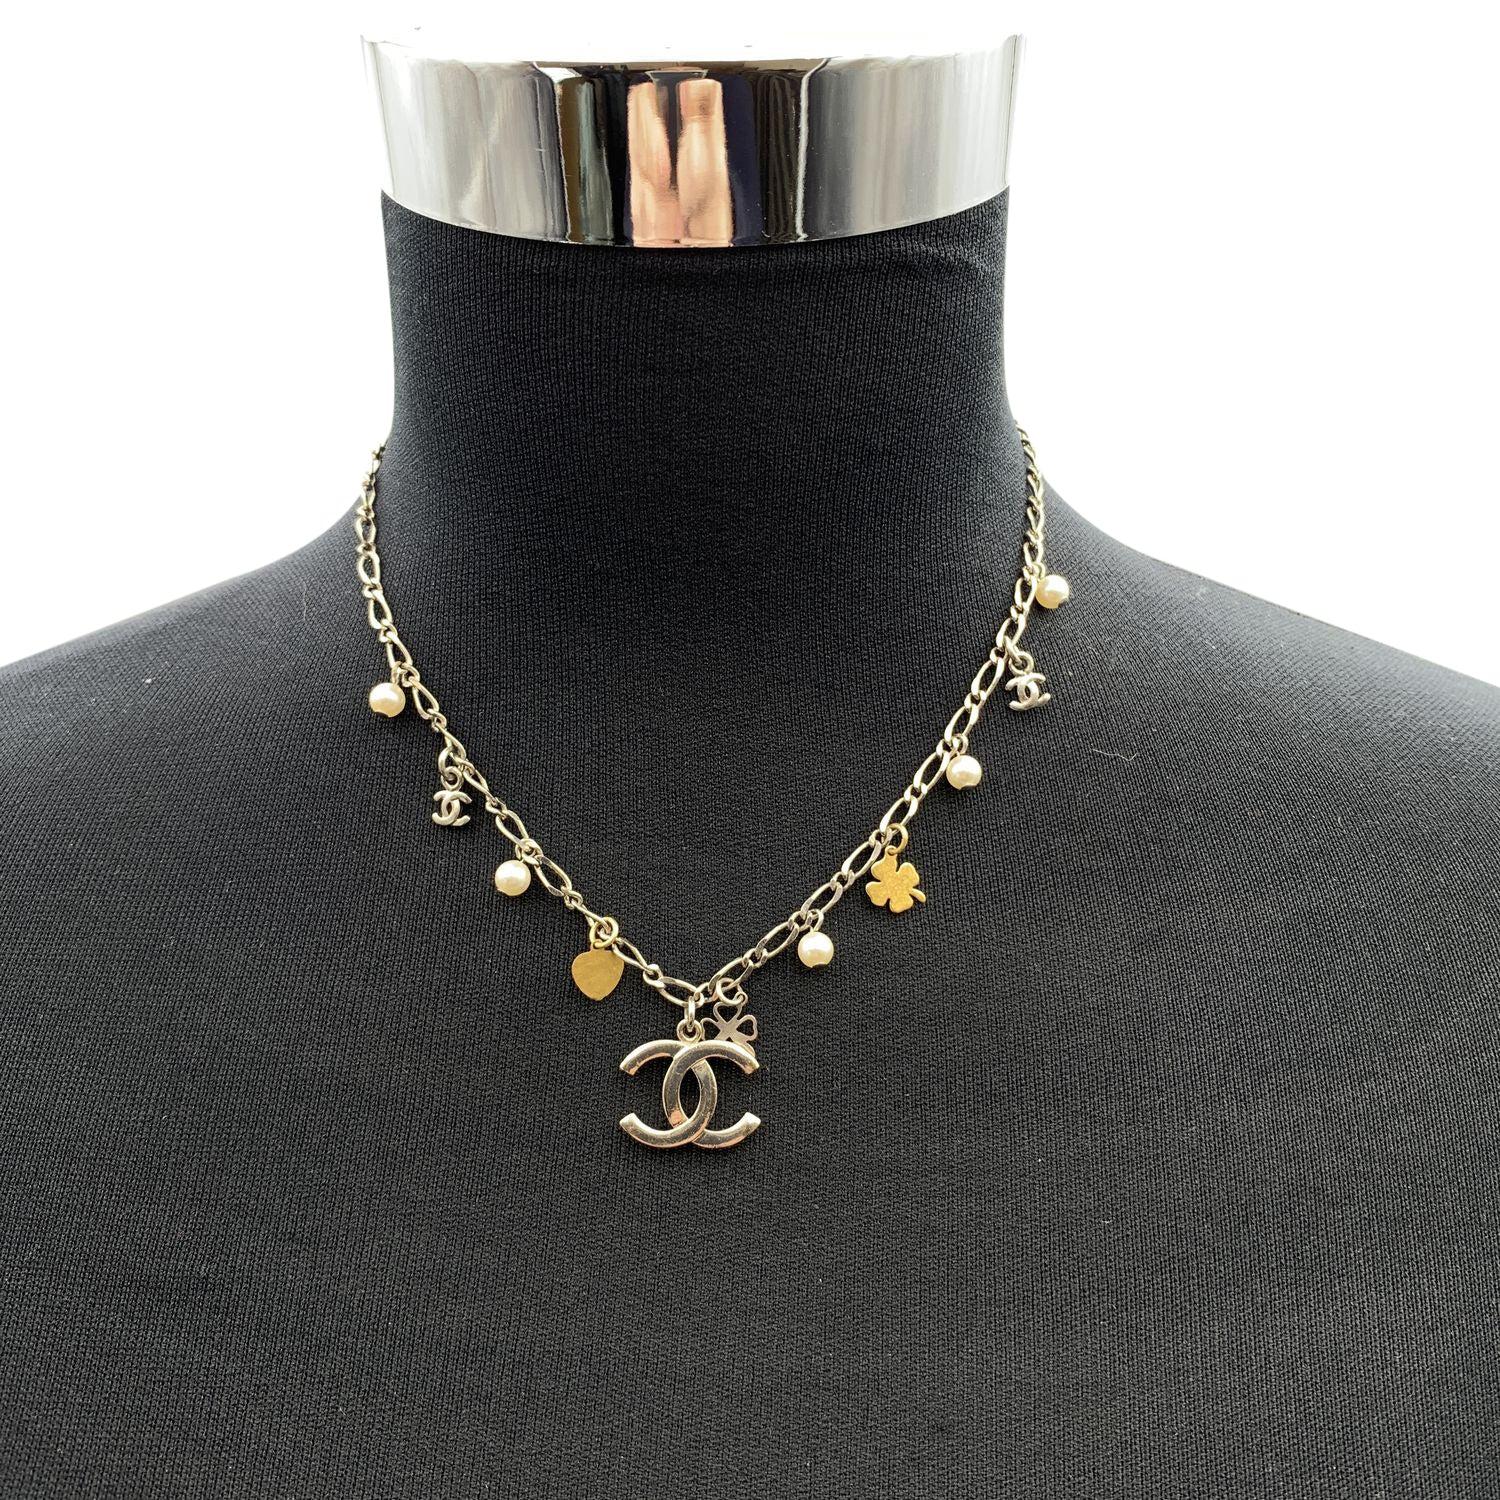 Lovely Chanel necklace with small charms. It features small golden clovers, small pearls and CC logos. Lobster closure. Total length of the chain: 16.5 inches - 41.9 cm. 'CHANEL 06 CC V - Made in France' oval mark at the end of the chain. Condition